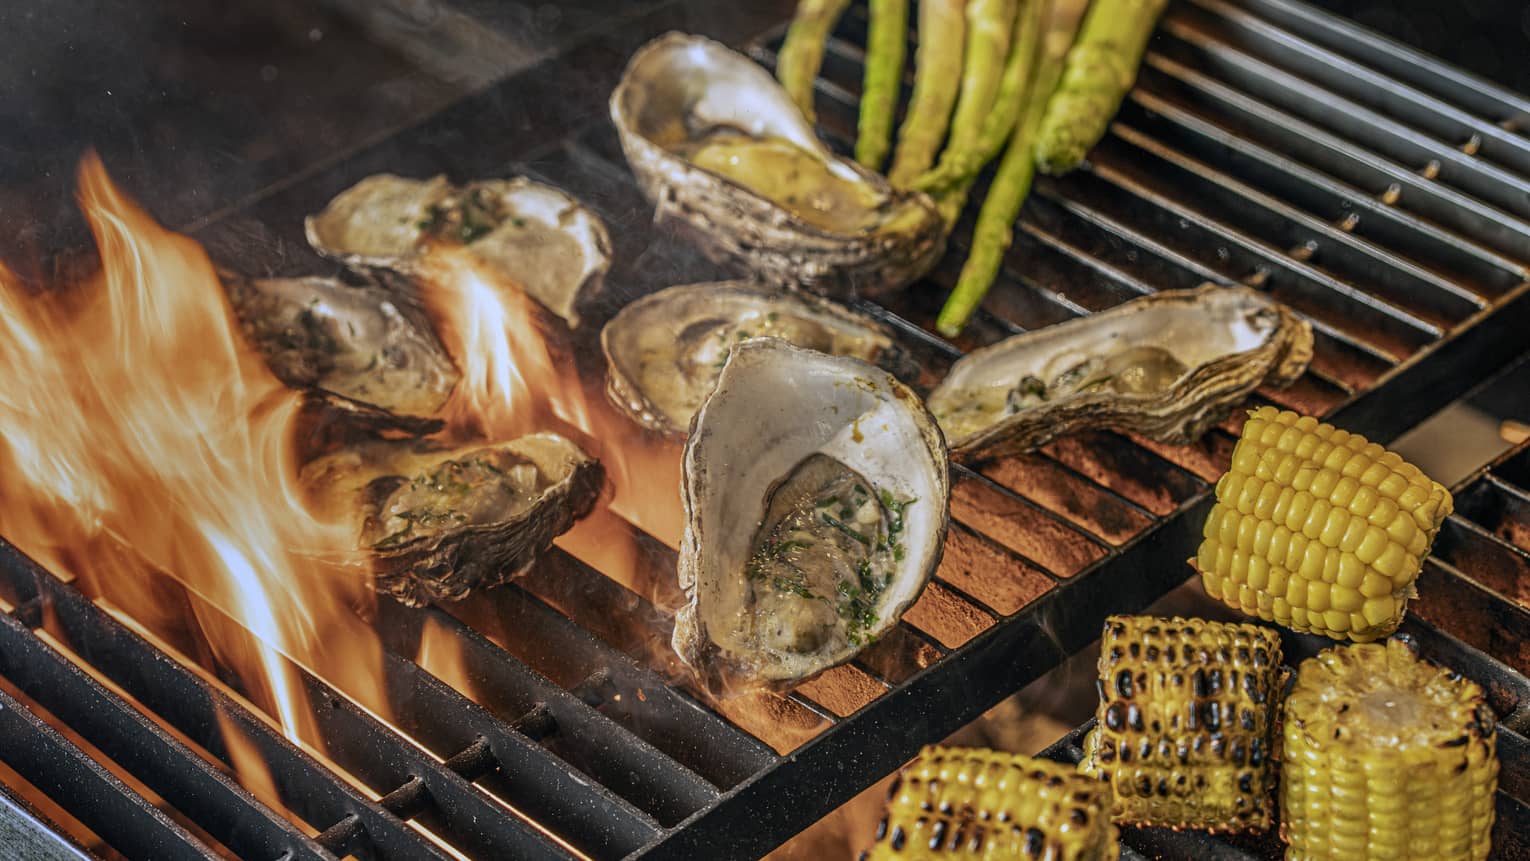 Oysters on the half shell, halved ears of charred corn and stalks of asparagus on an open-flame grill